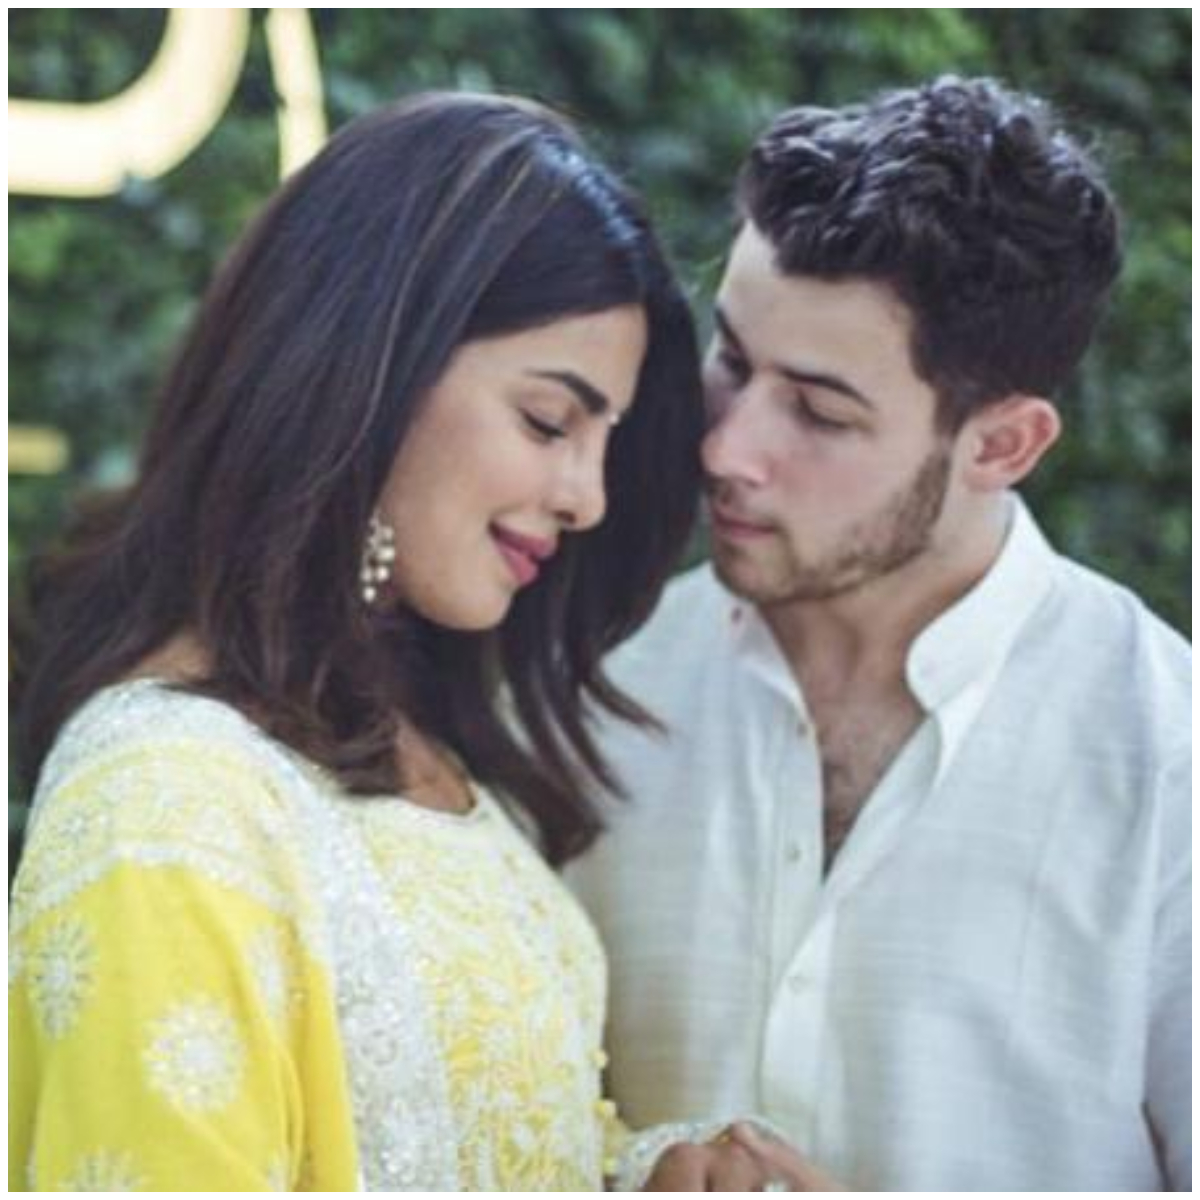  Exclusive: Contrary to reports, Priyanka Chopra to have an intimate wedding with only family and friends